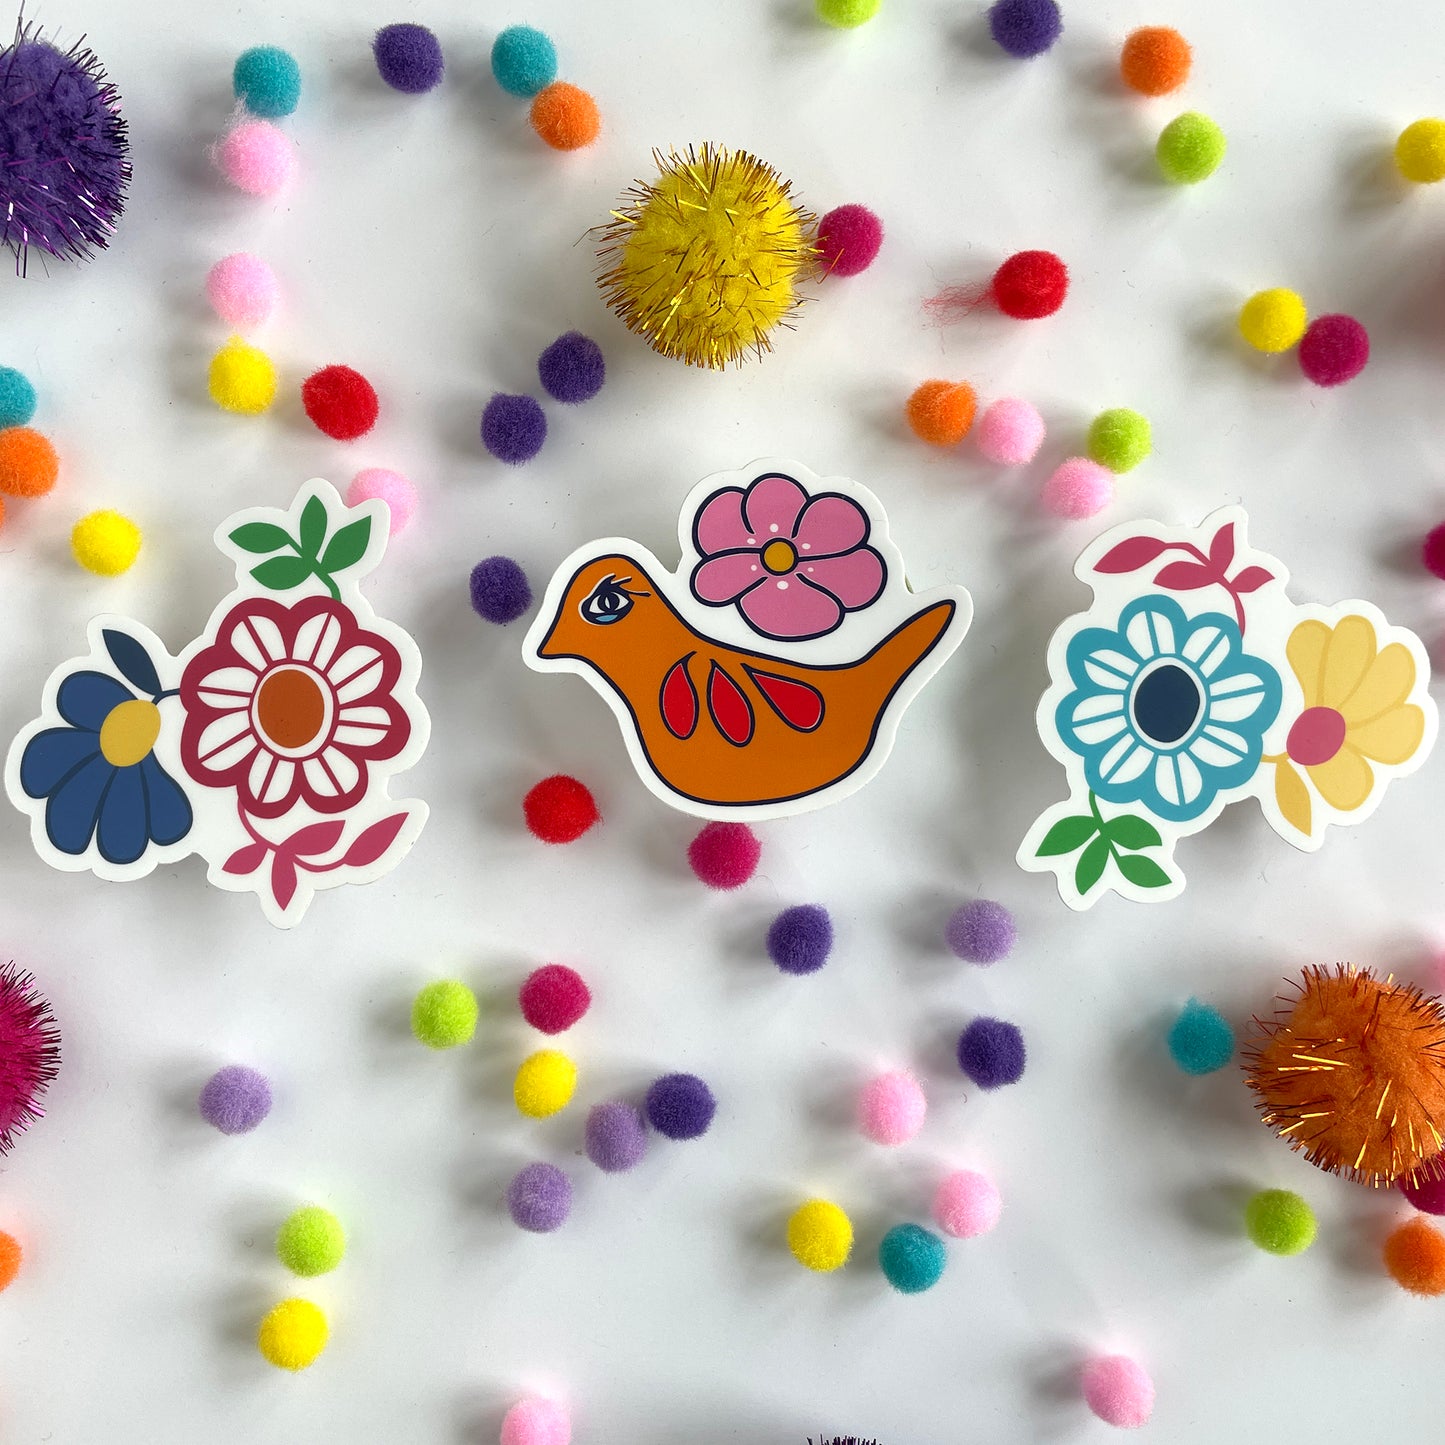 Blue and Yellow Flowers Sticker